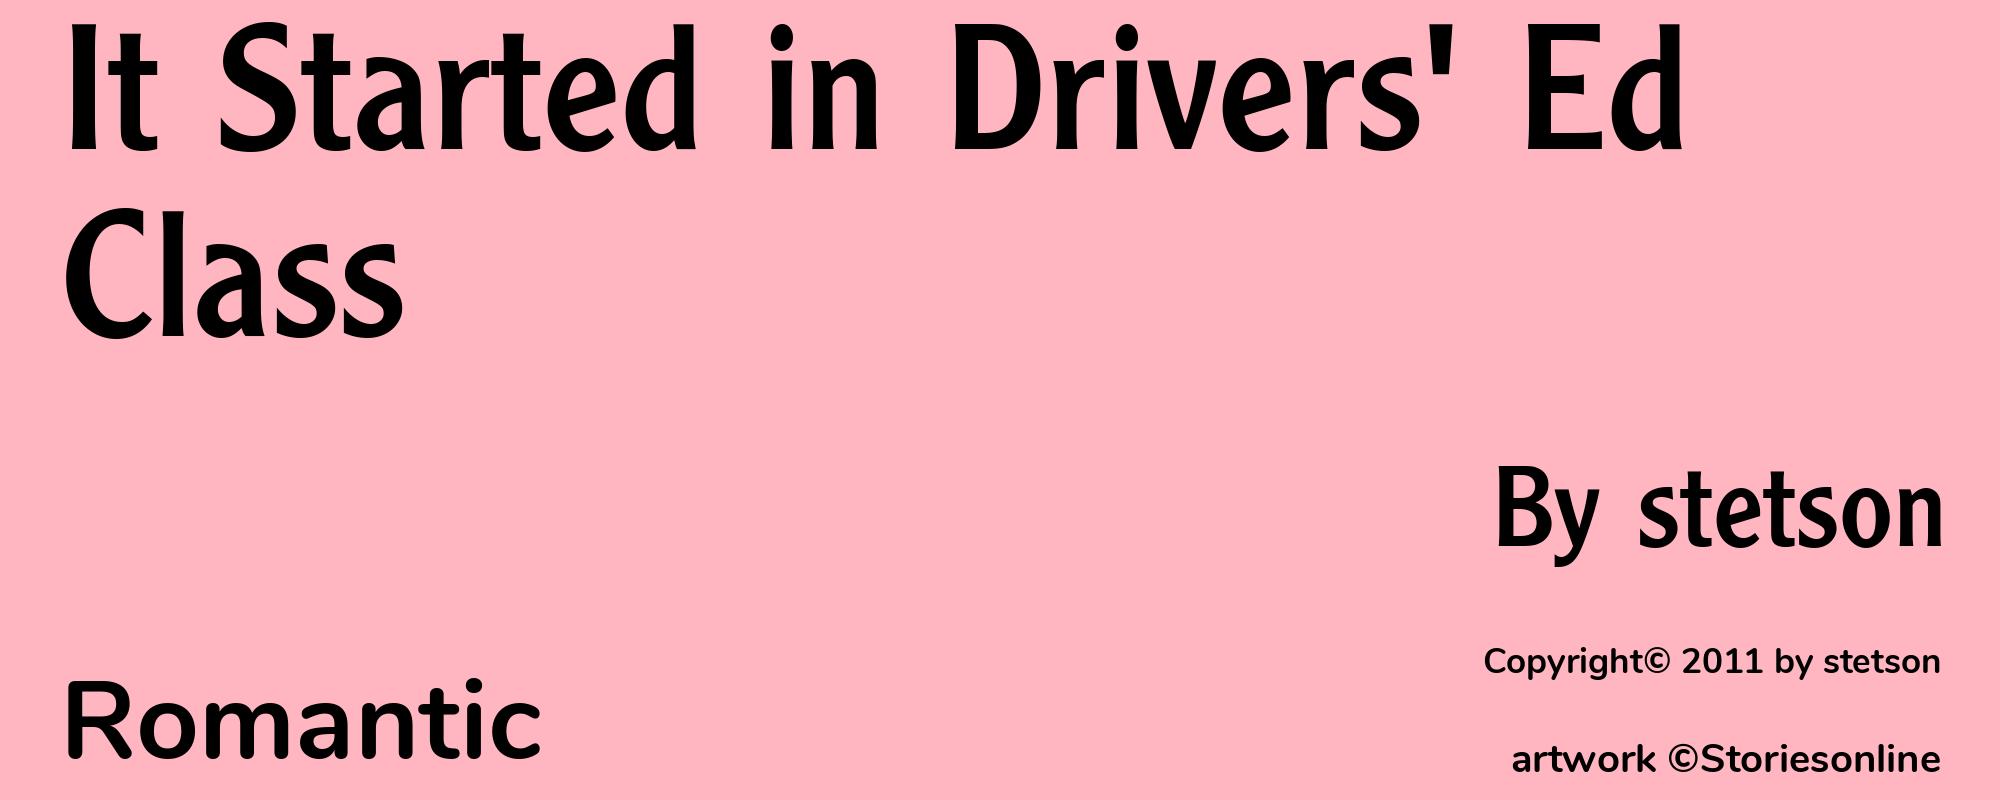 It Started in Drivers' Ed Class - Cover